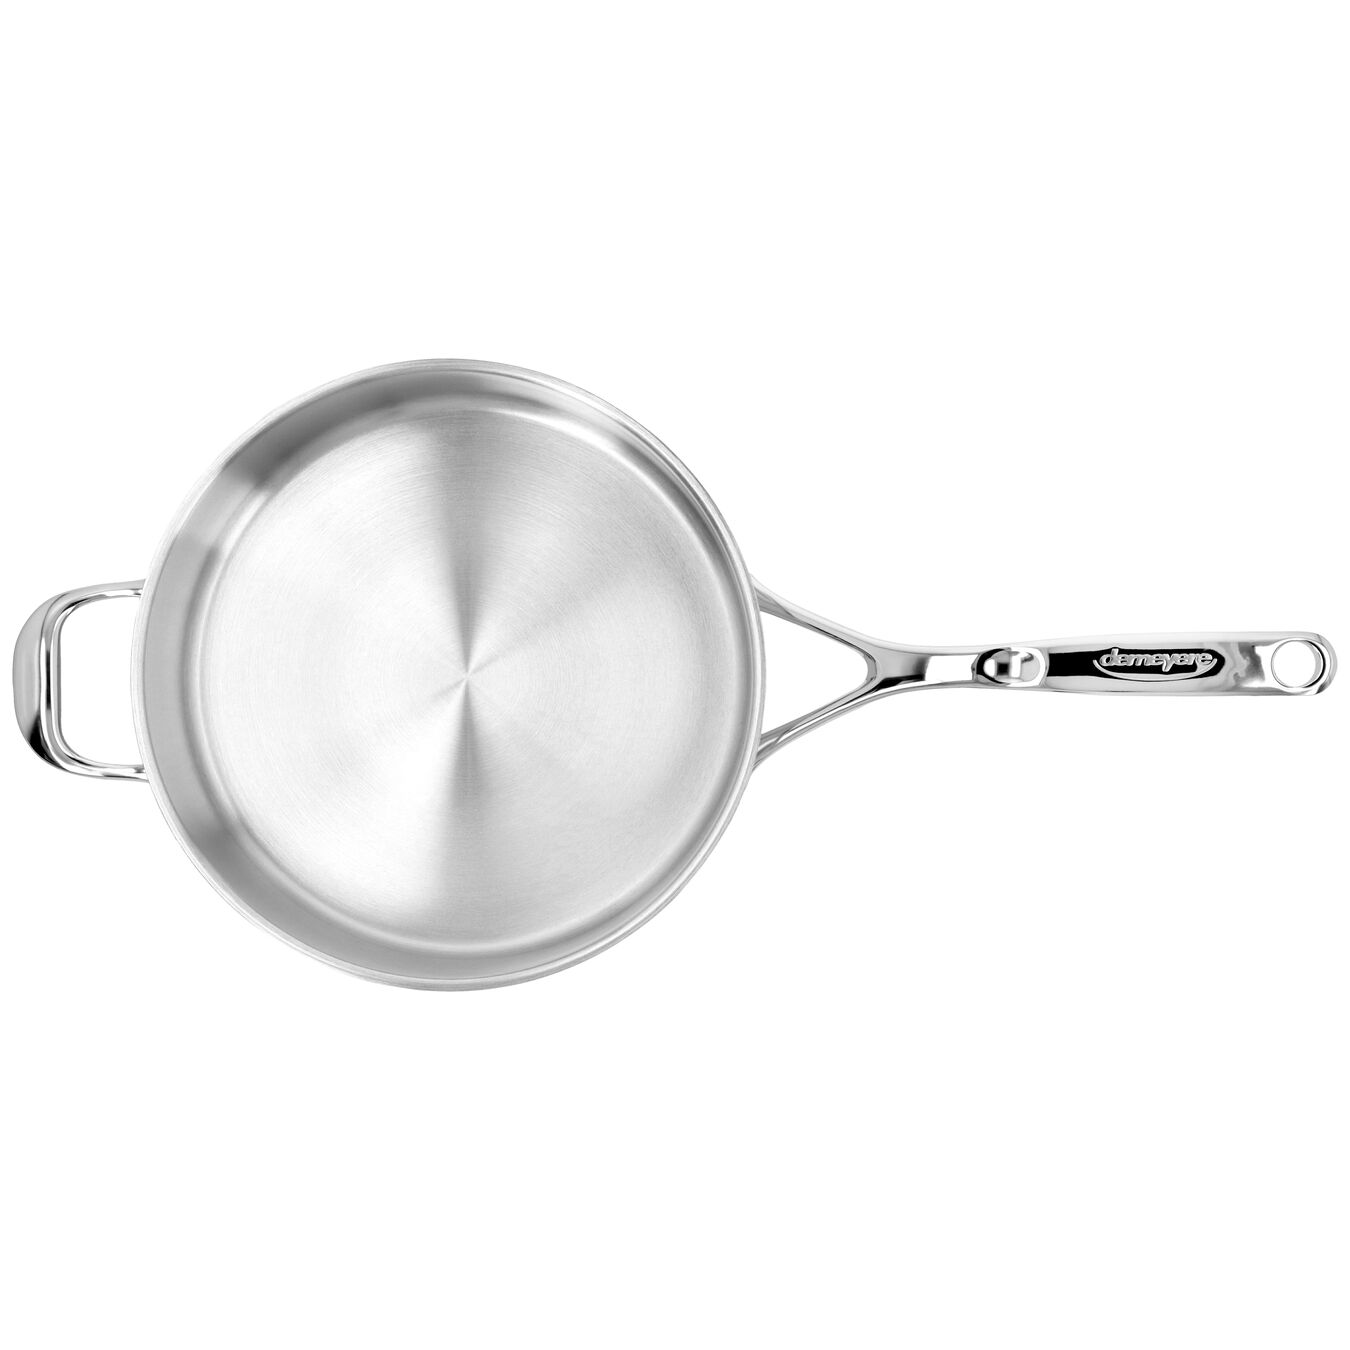 24 cm round 18/10 Stainless Steel Saute pan with lid silver,,large 6